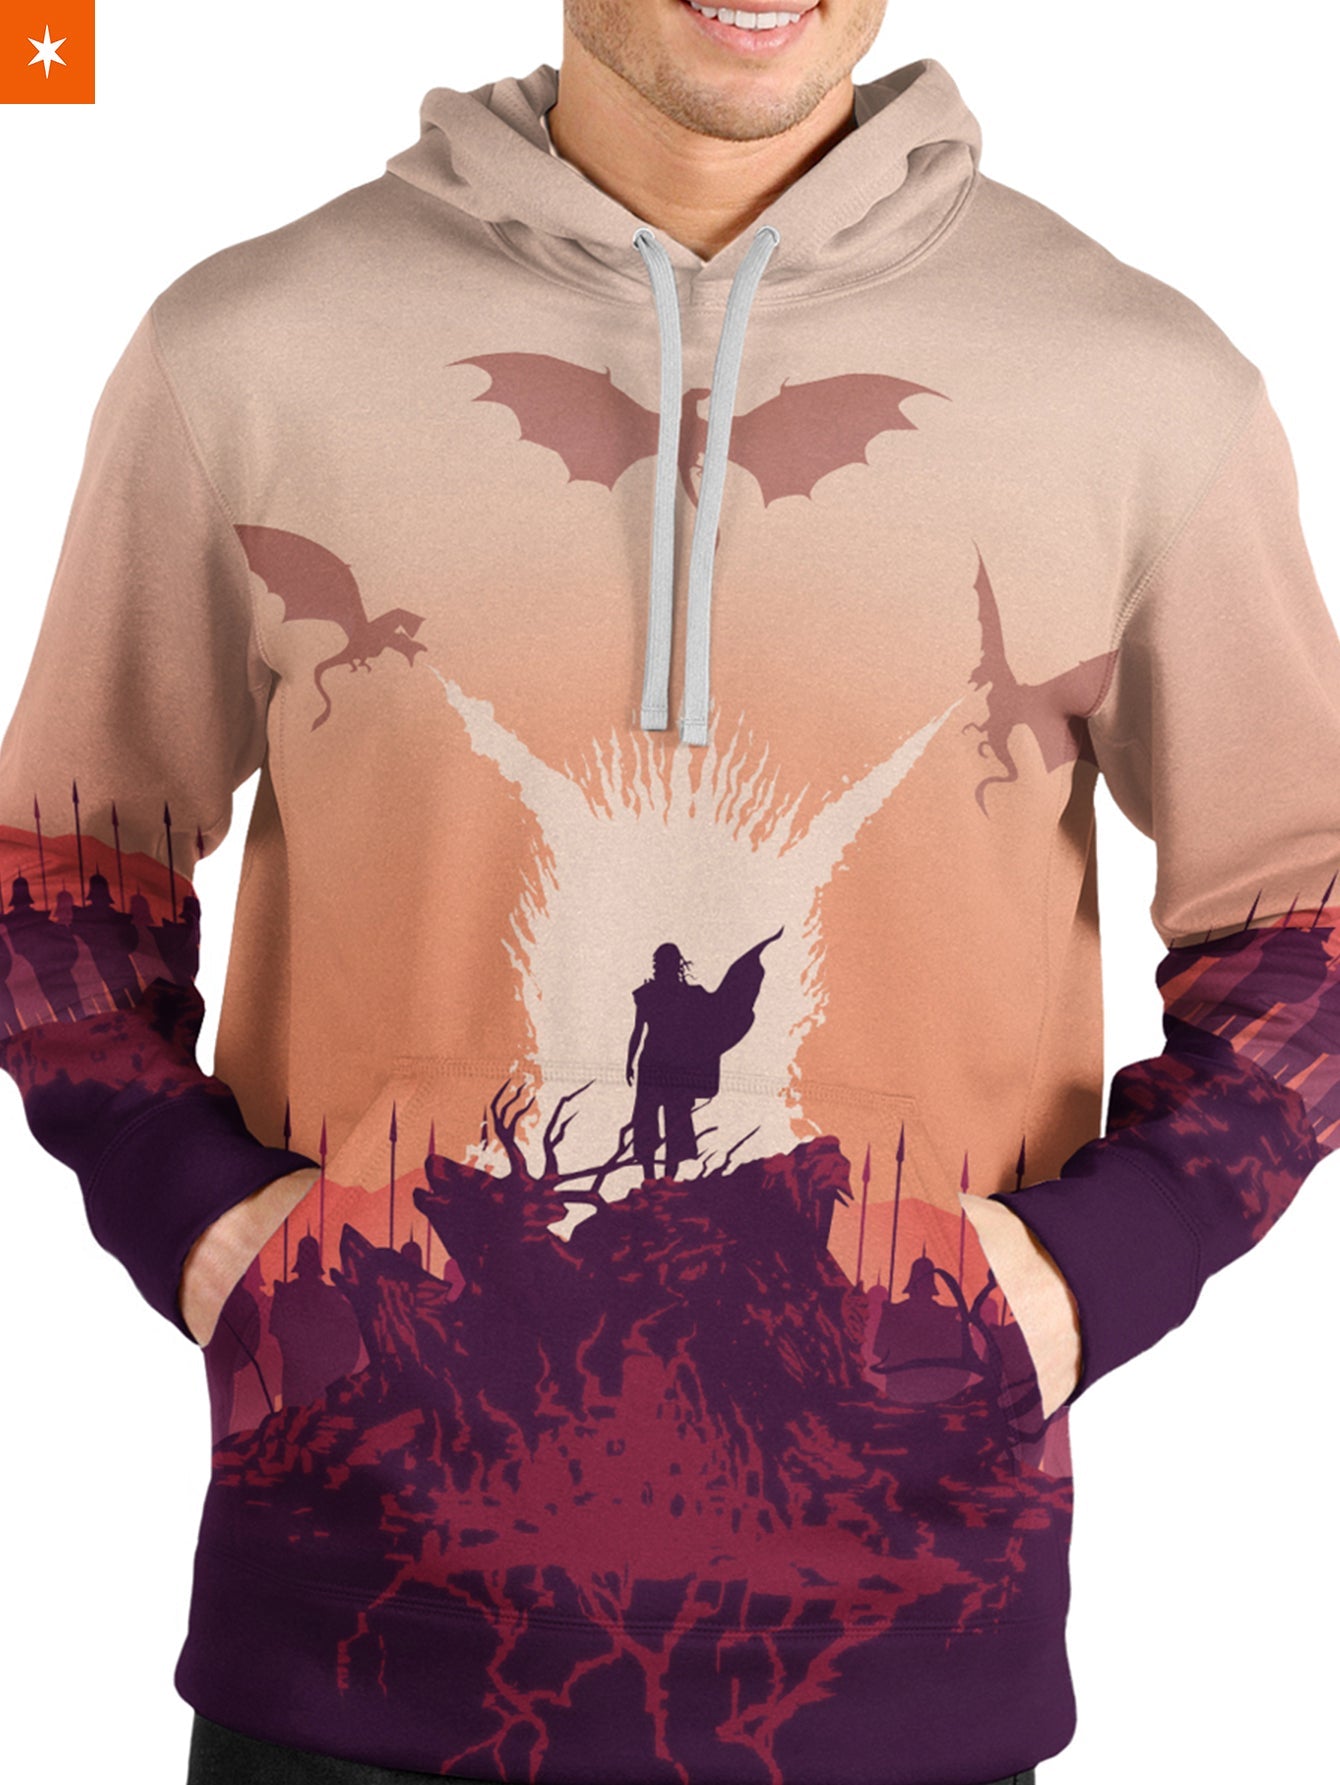 Fandomaniax - The Reign of the Queen Unisex Pullover Hoodie